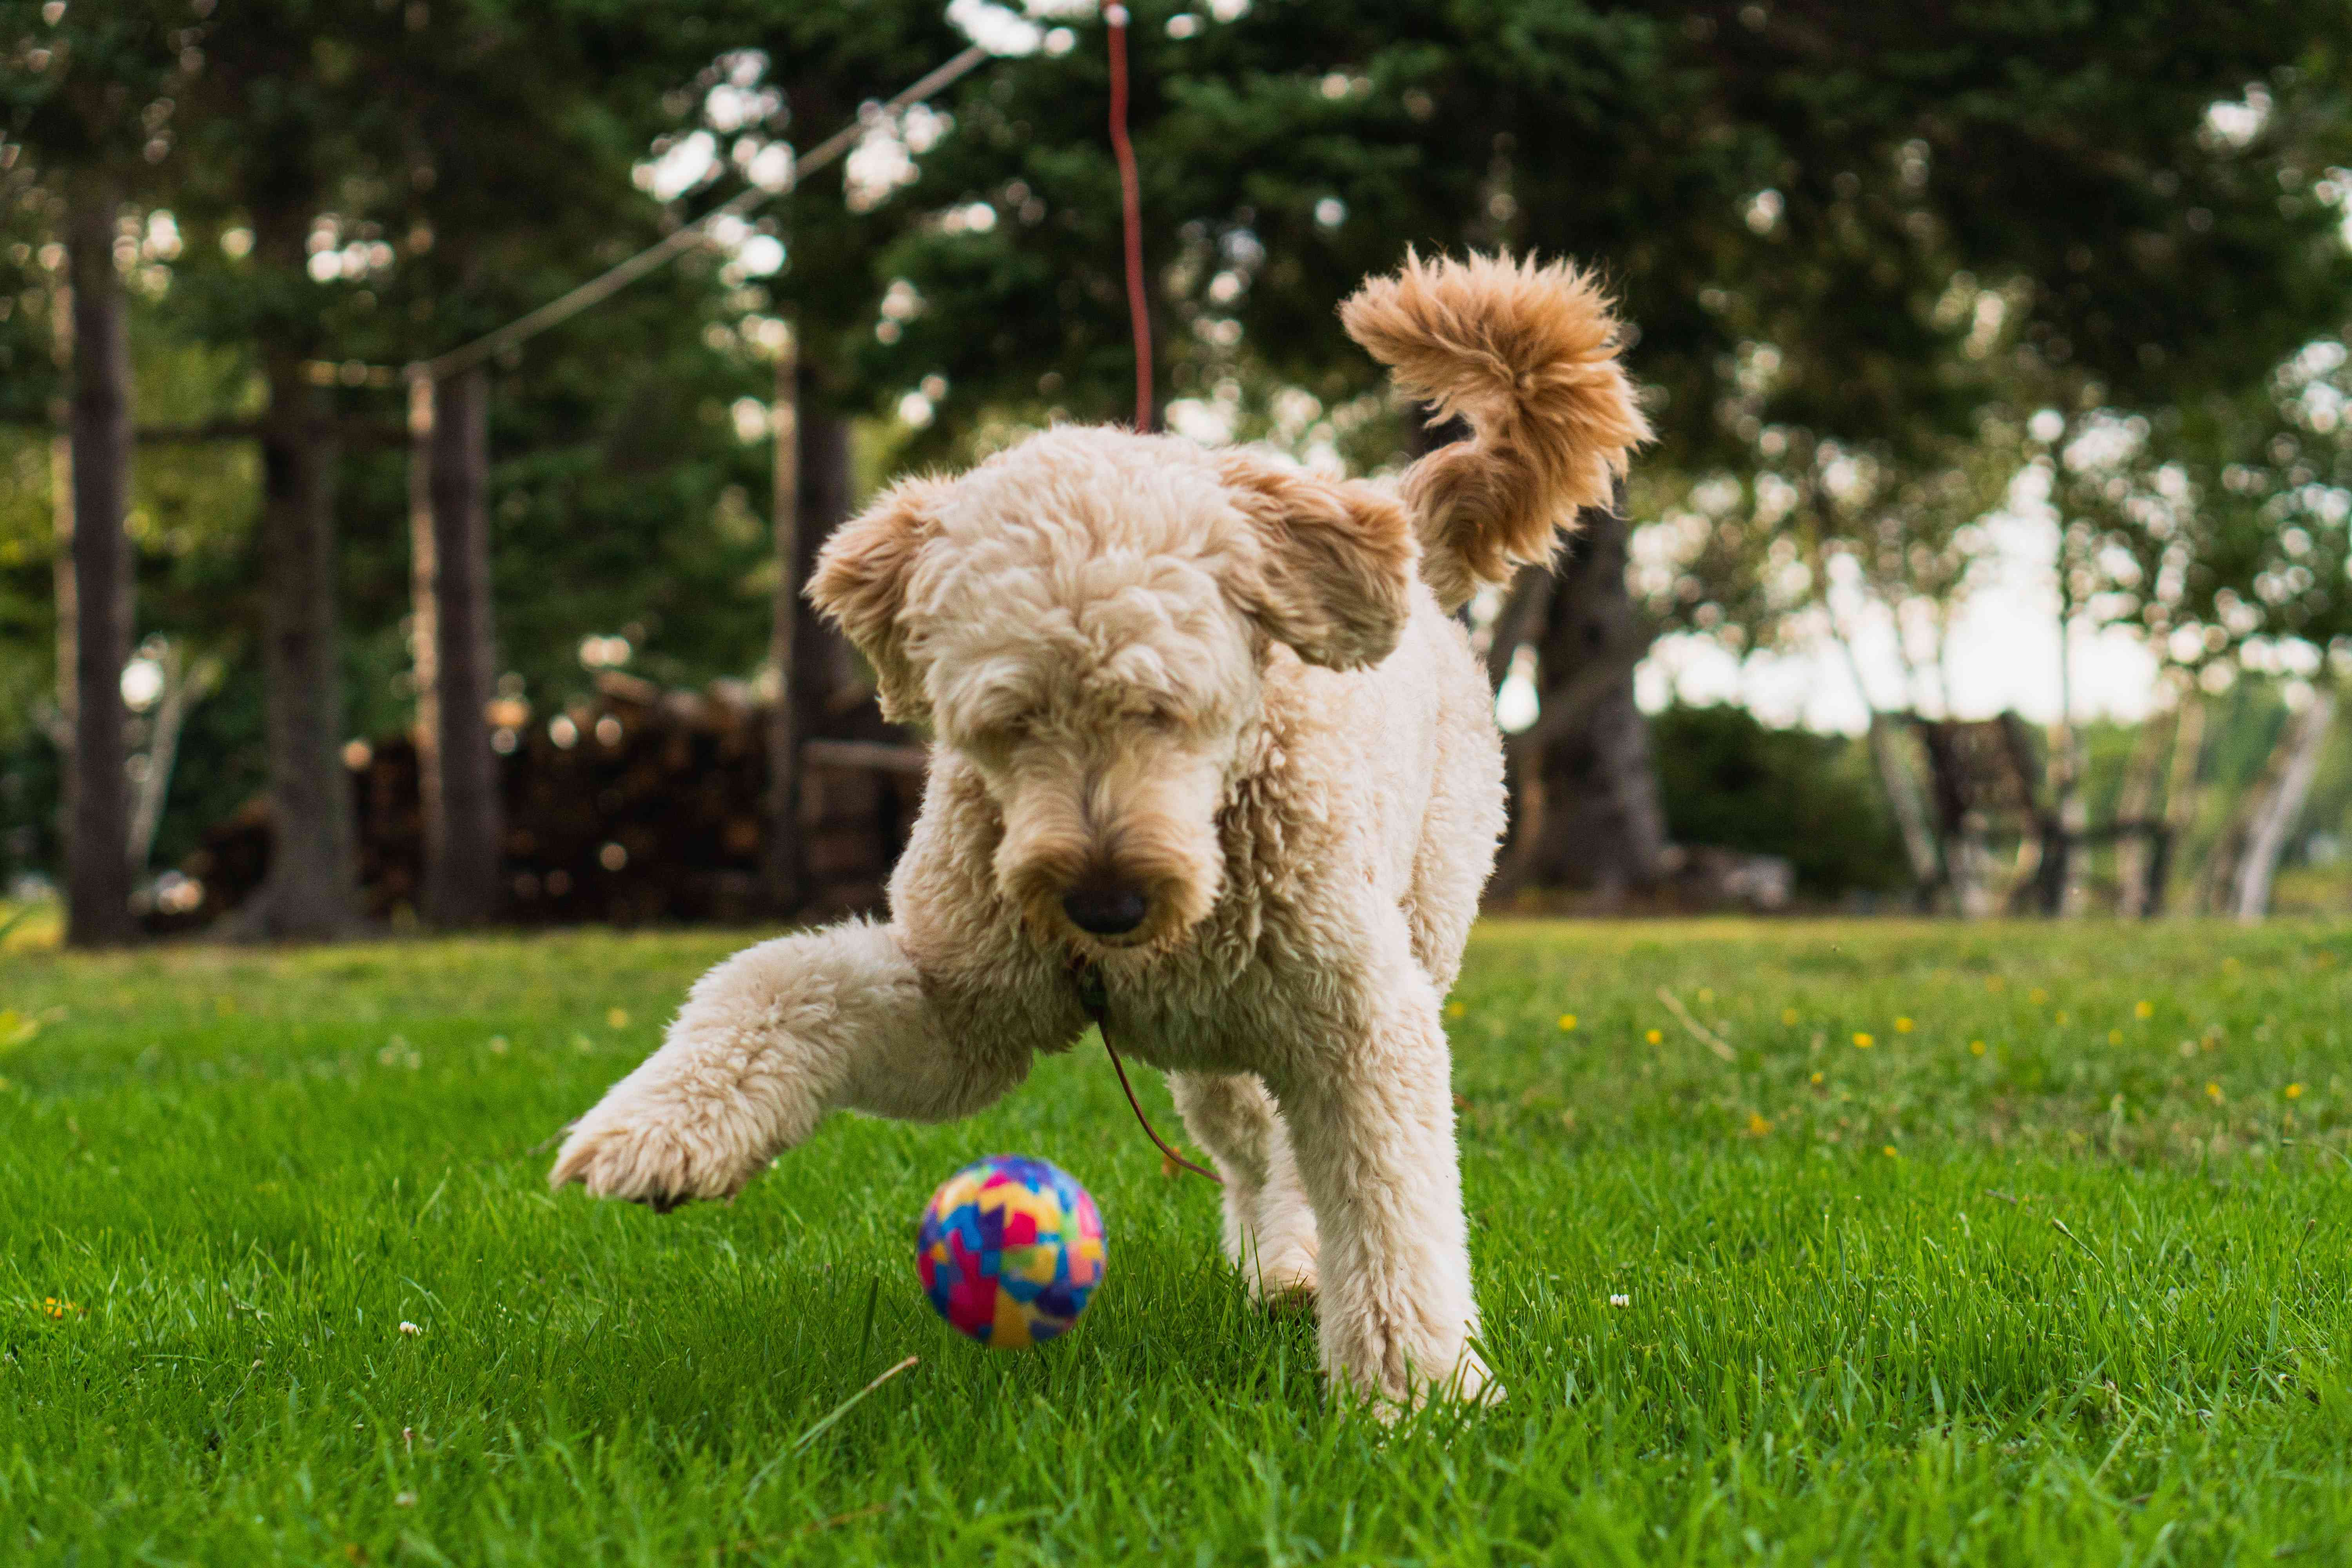 10 Effective Ways to Manage Goldendoodle Energy Levels for a Calmer Home Environment